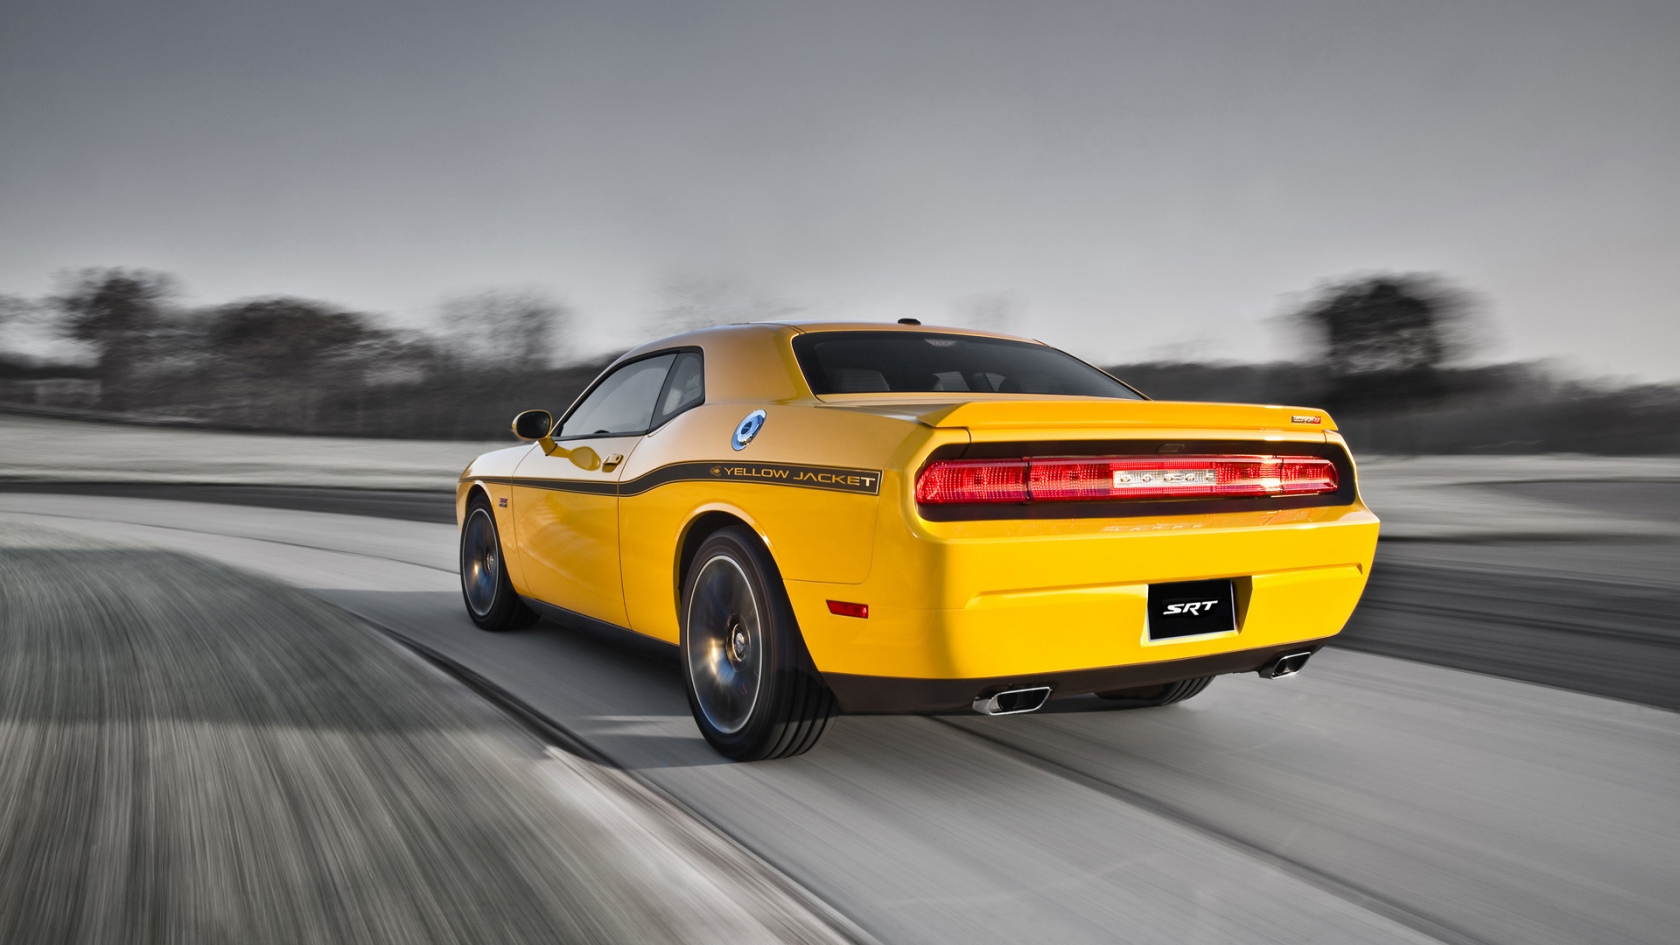 Dodge Challenger Yellow Jacket for 1680 x 945 HDTV resolution